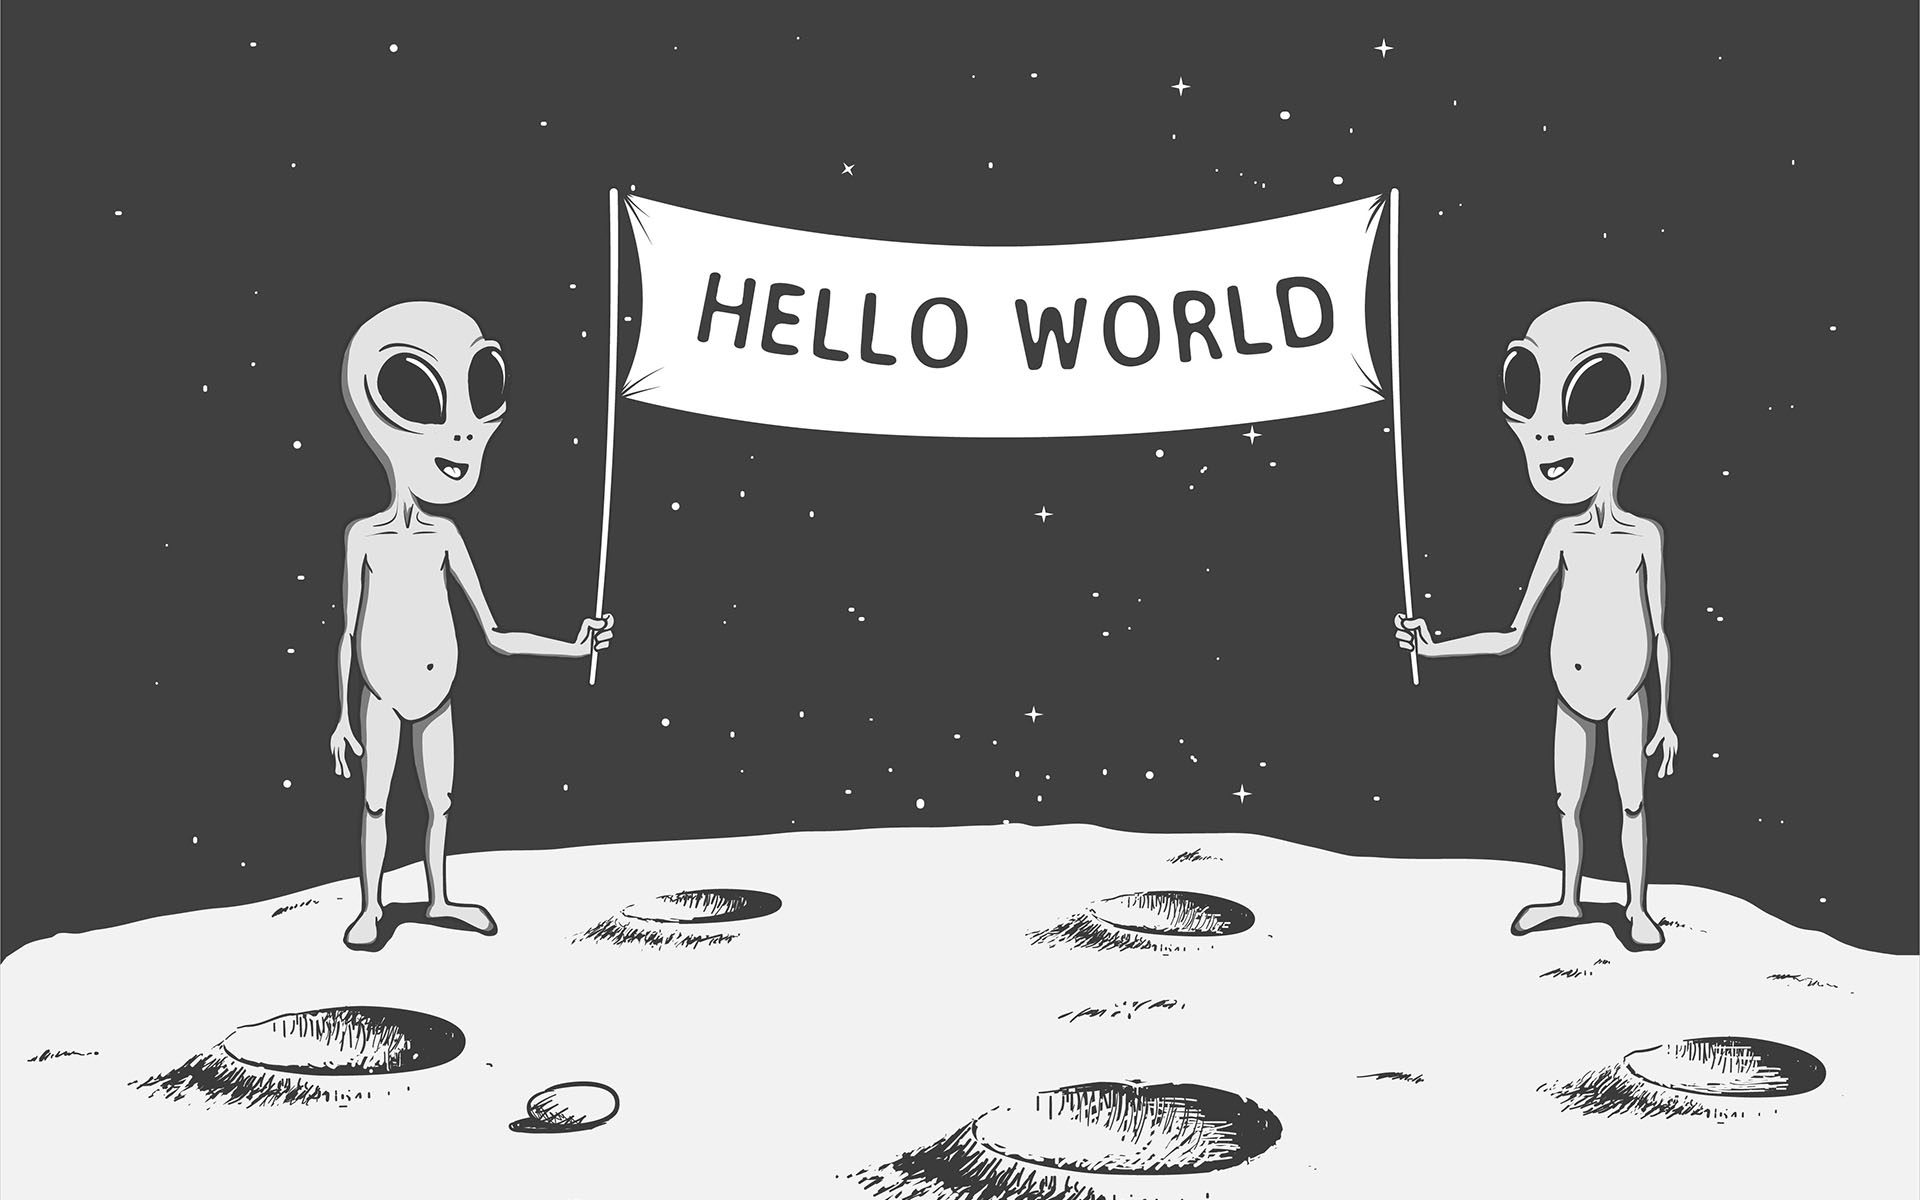 Aliens holding a banner that says "Hello World"